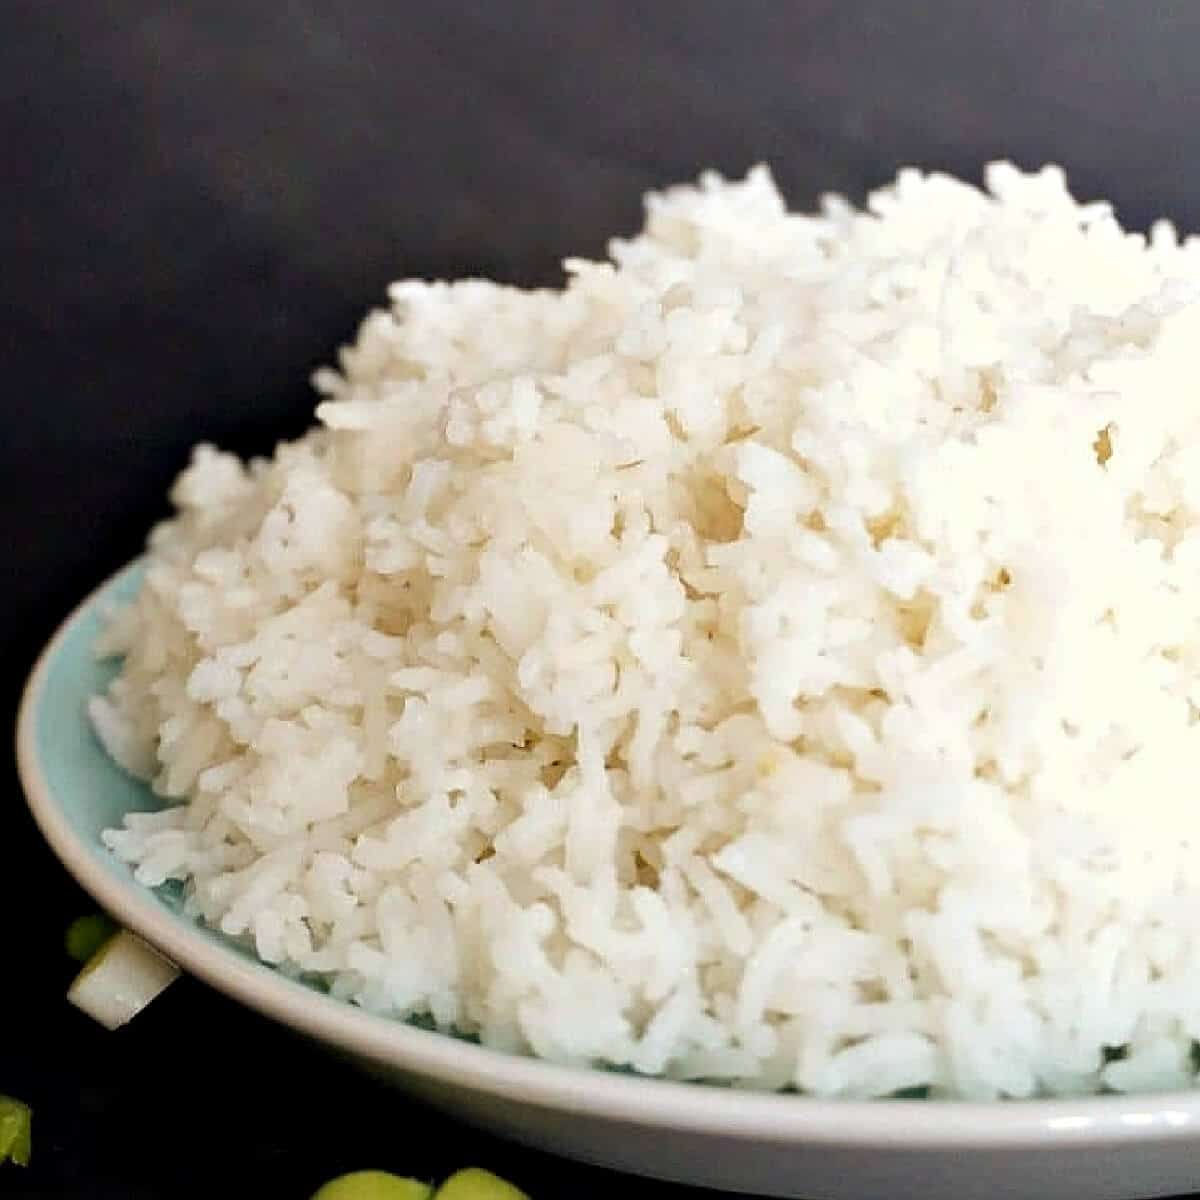 https://www.mygorgeousrecipes.com/wp-content/uploads/2019/01/How-to-Cook-Basmati-Rice-to-Perfection-13.jpg